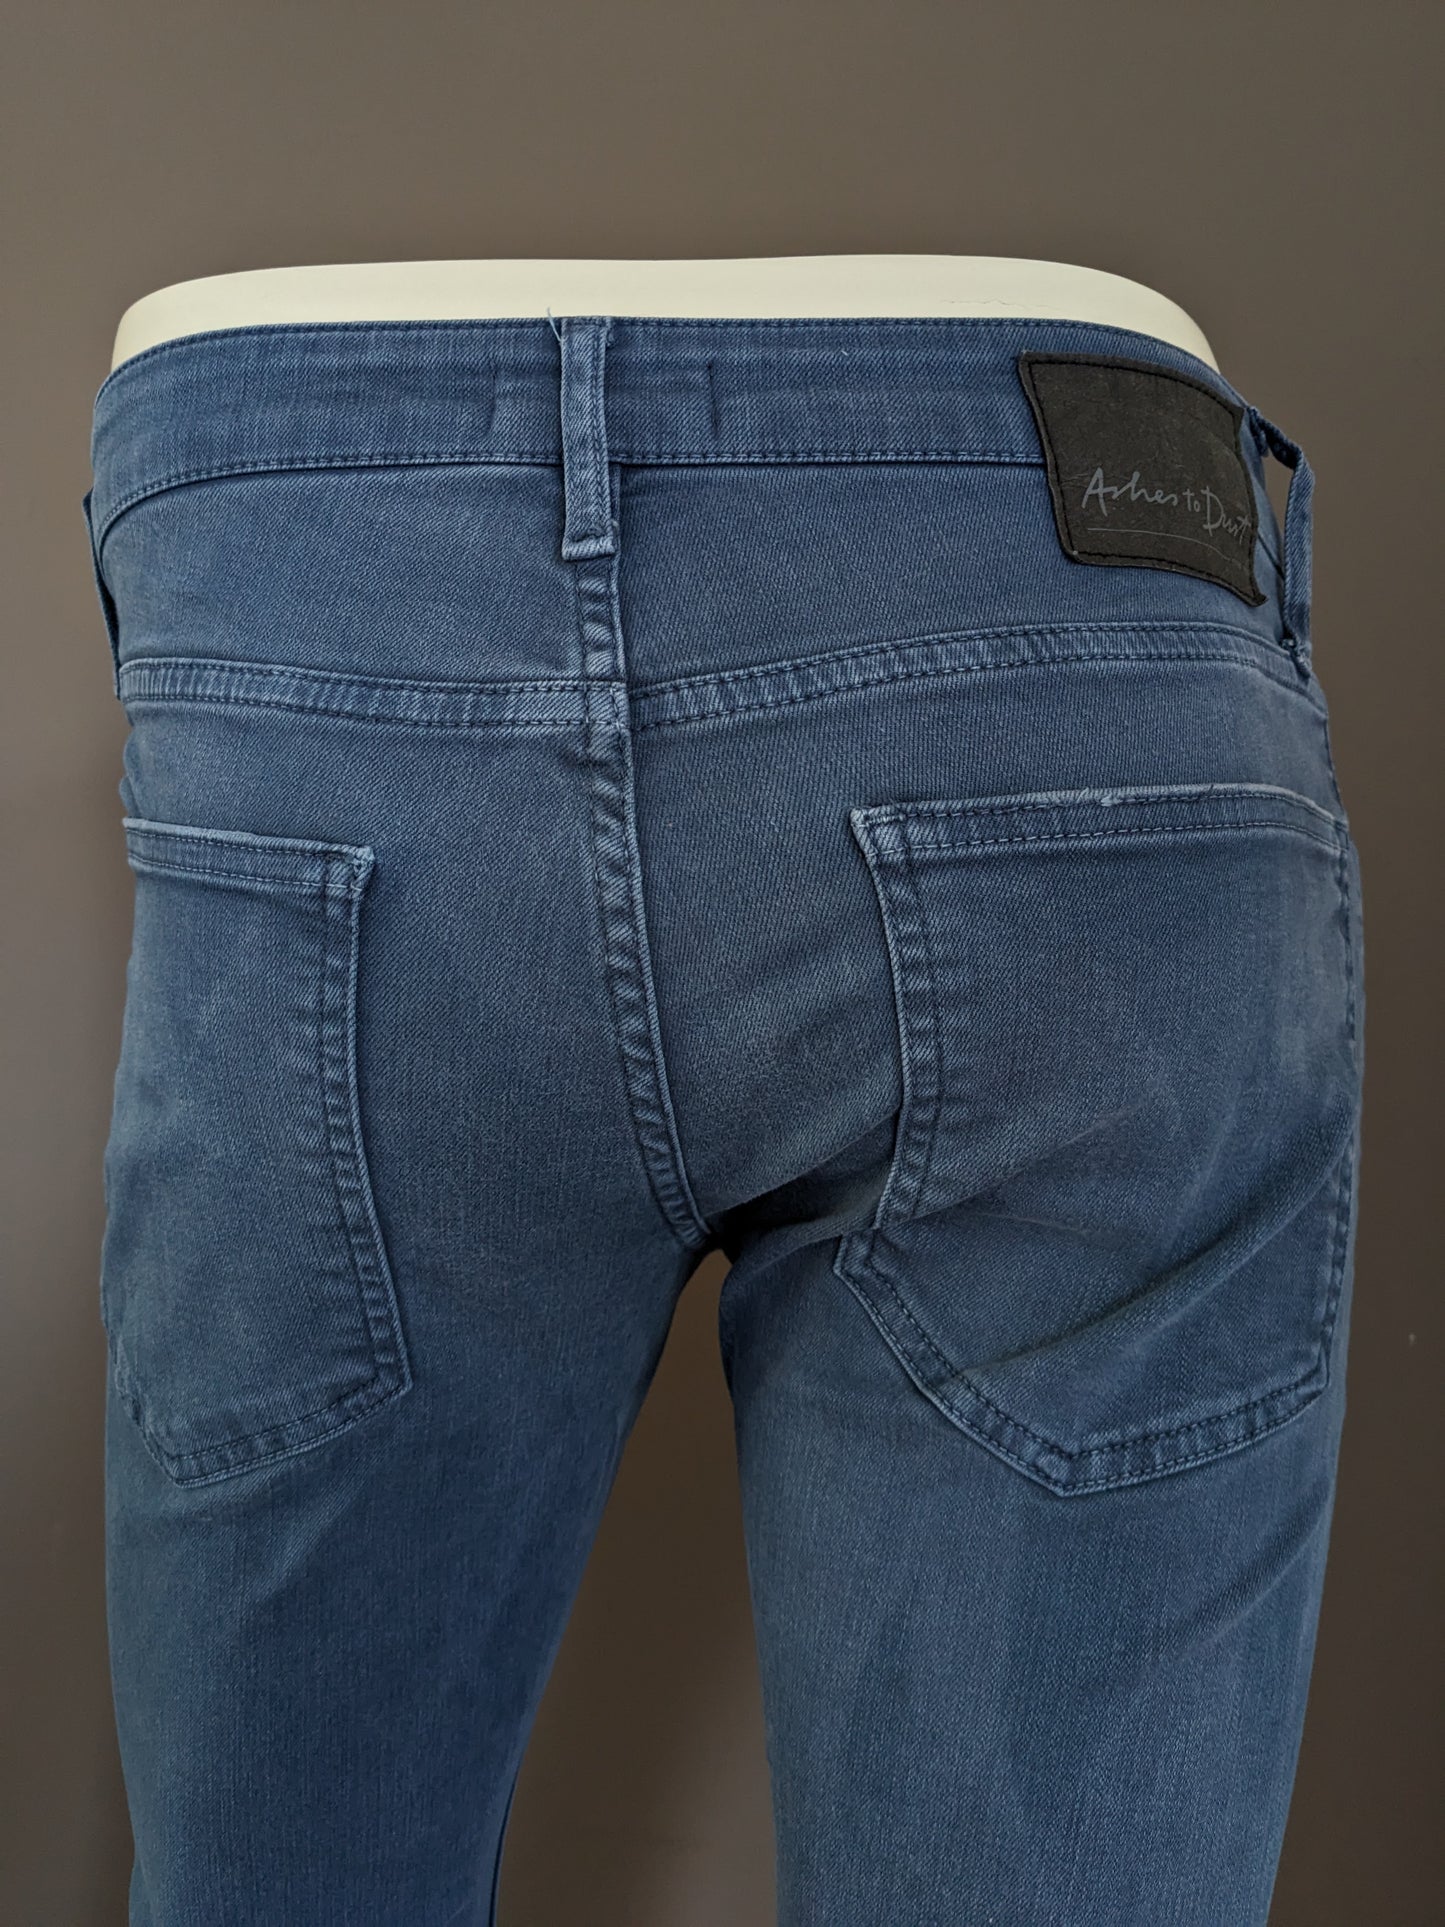 Ashes to Dust Jeans. Blauw. Maat W30 - L26 stretch.